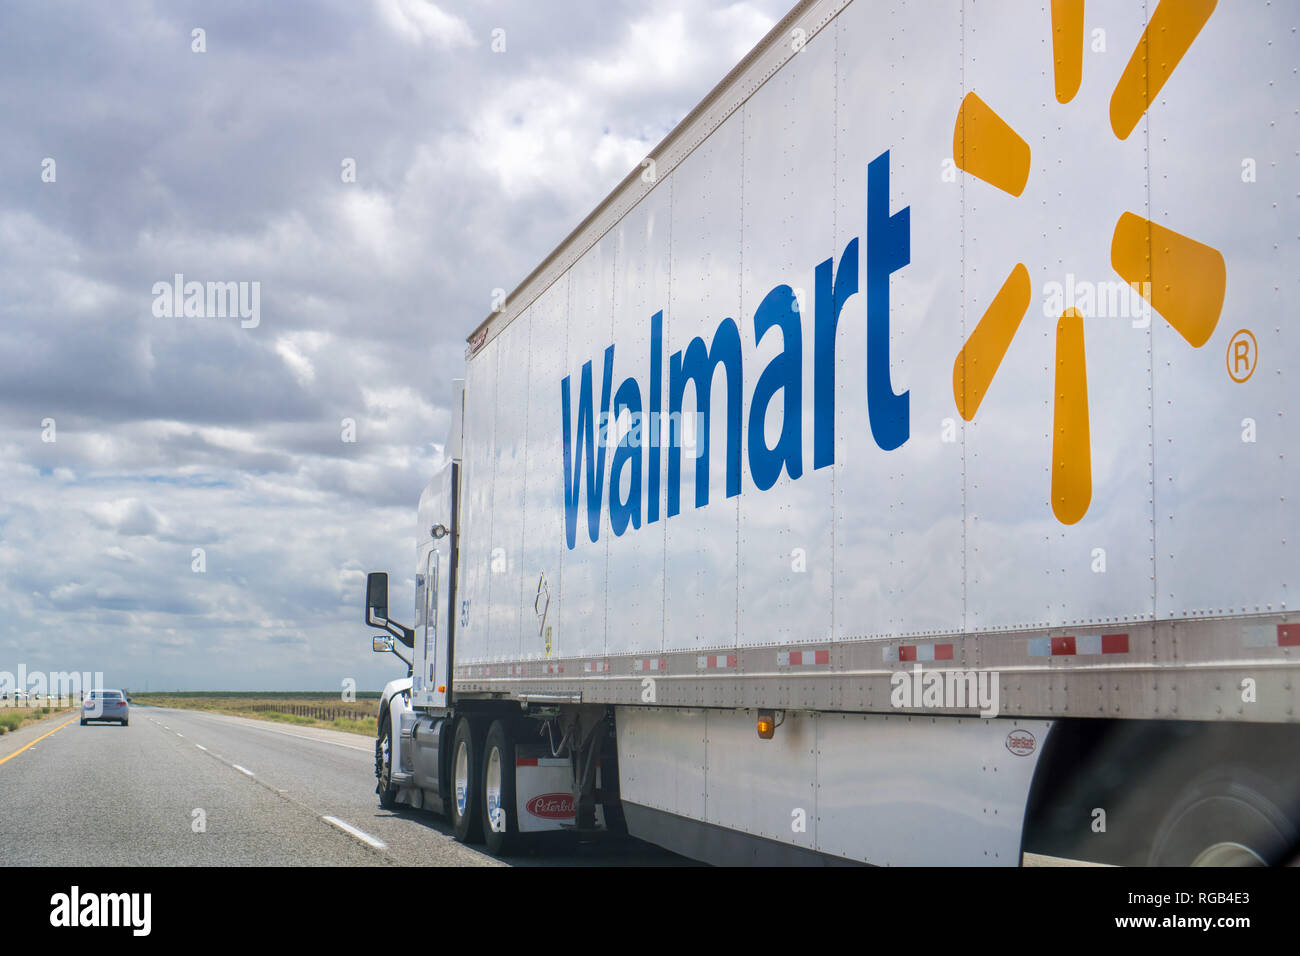 May 25, 2018 Bakersfield / CA / USA - Walmart truck driving on the interstate on a cloudy day Stock Photo